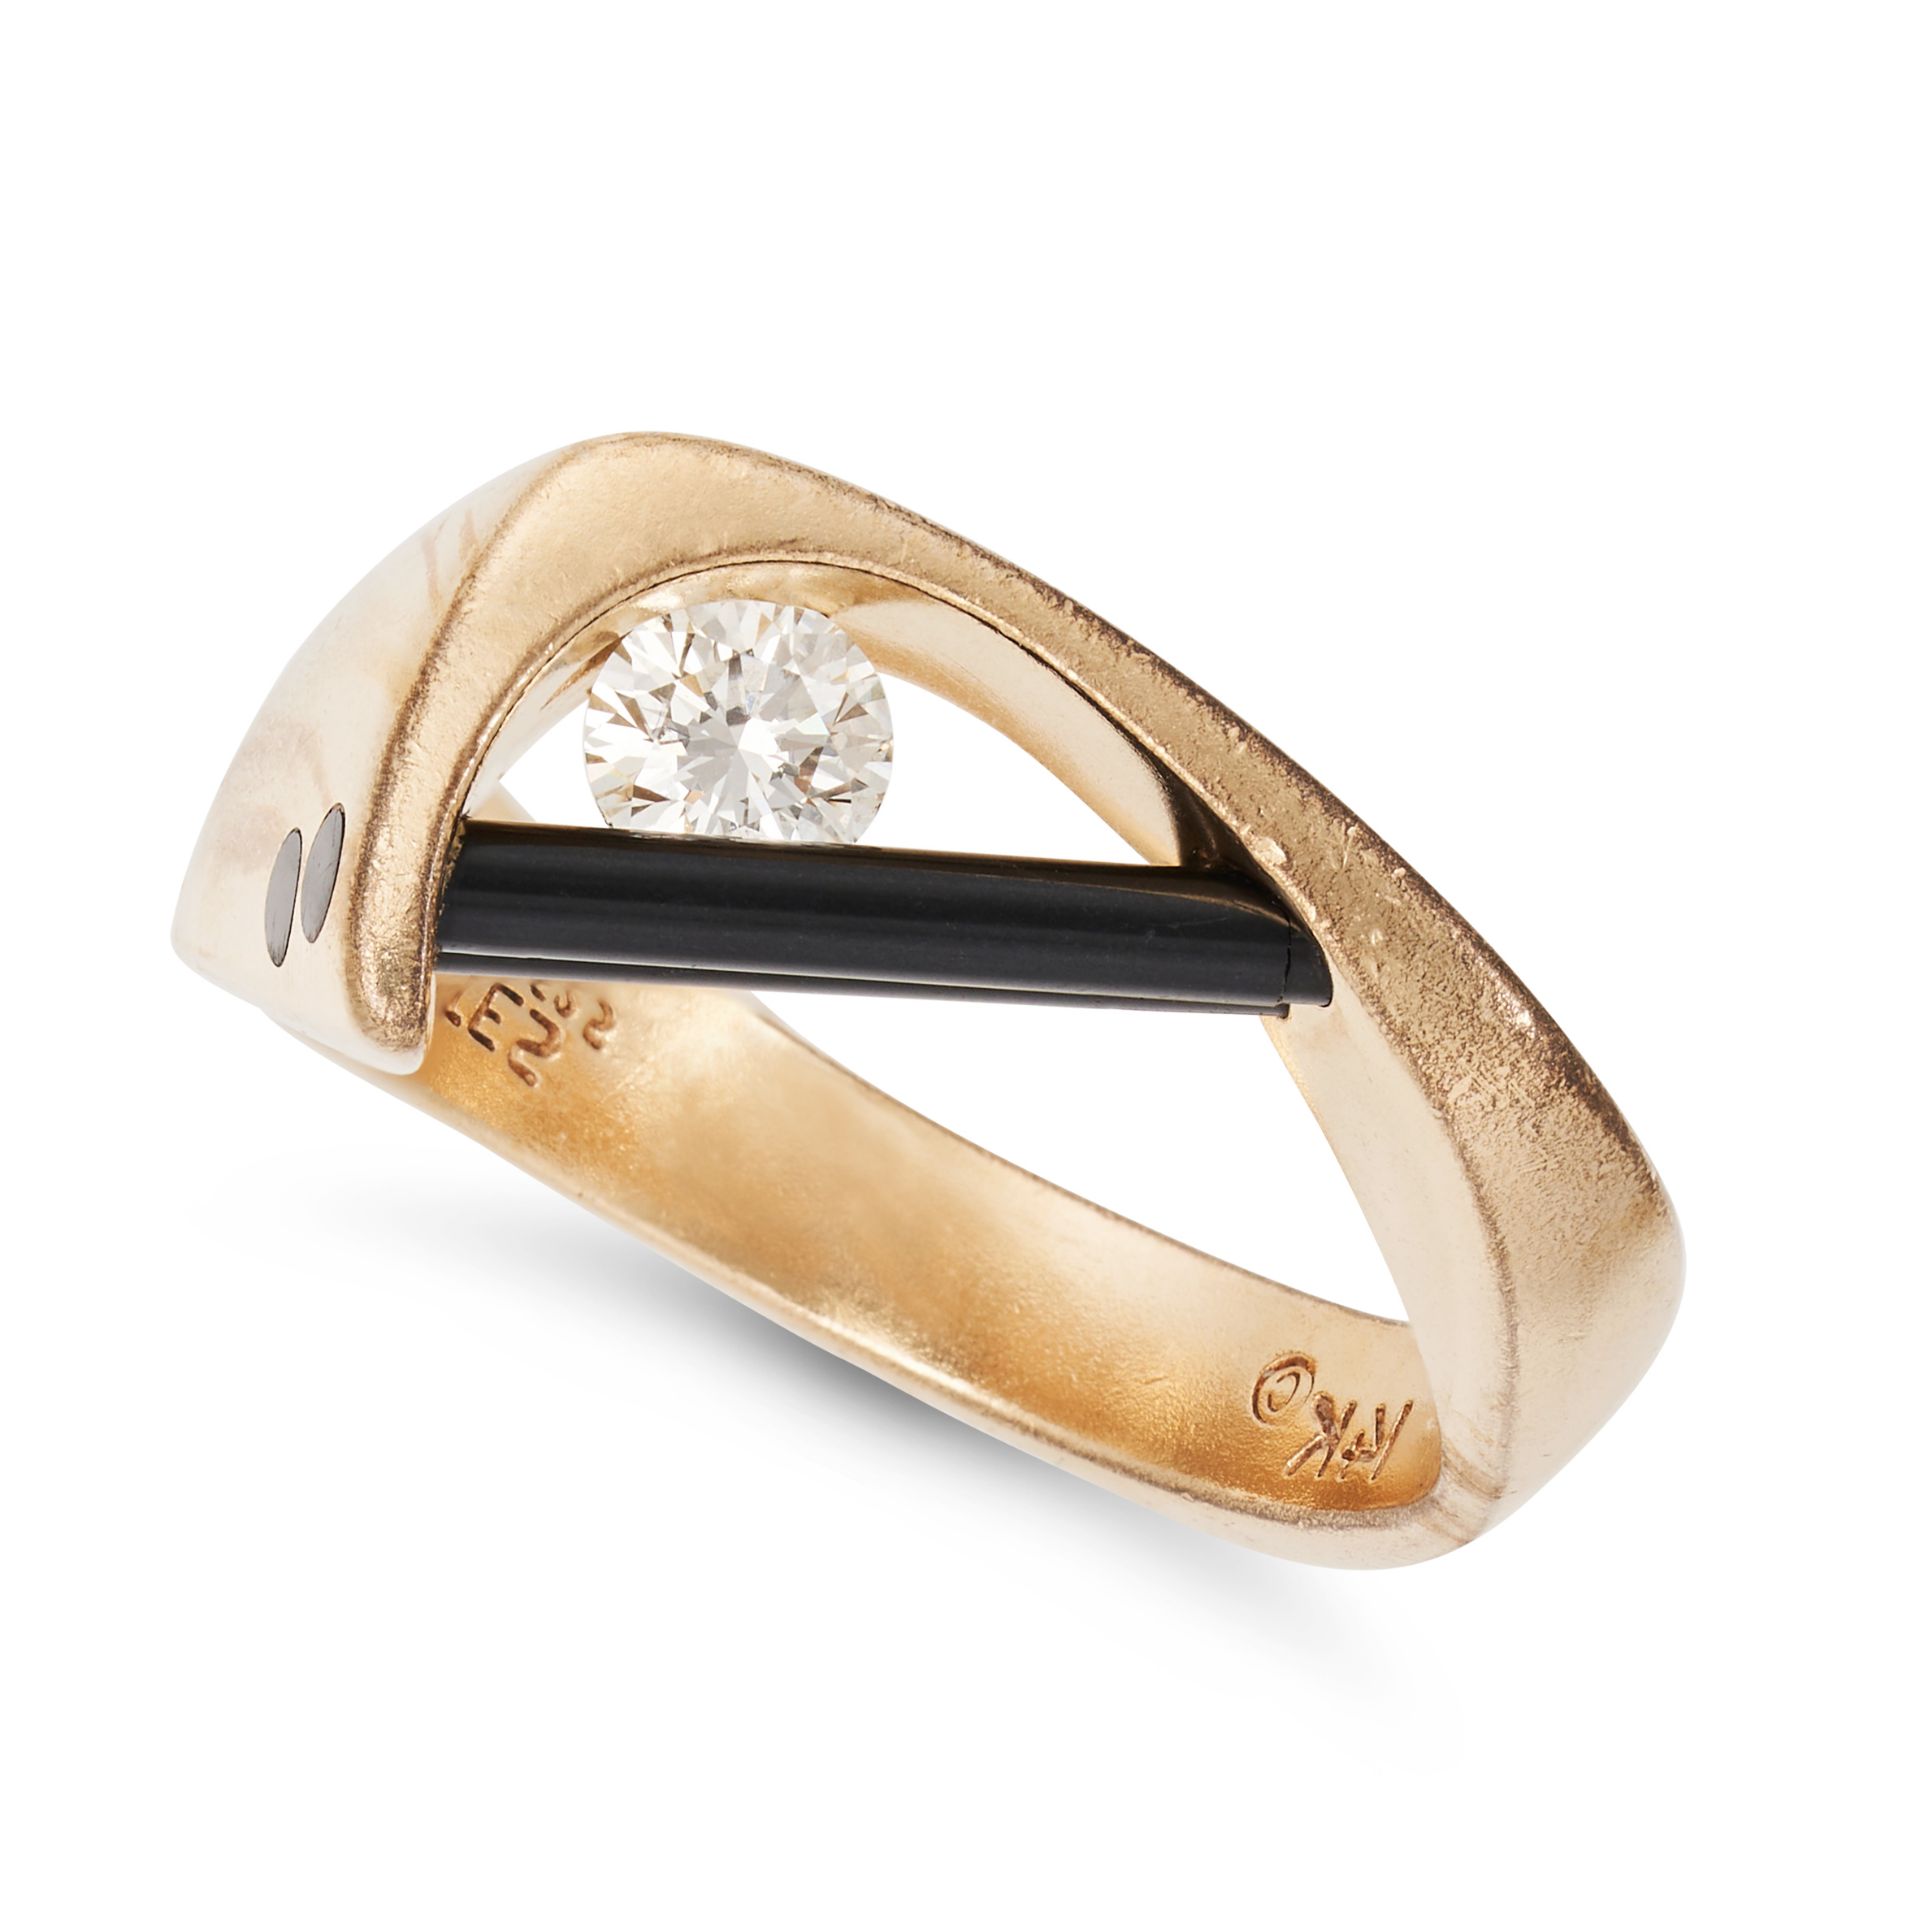 AN ONYX AND DIAMOND DRESS RING in 14ct yellow gold, set with a round brilliant cut diamond and tw...